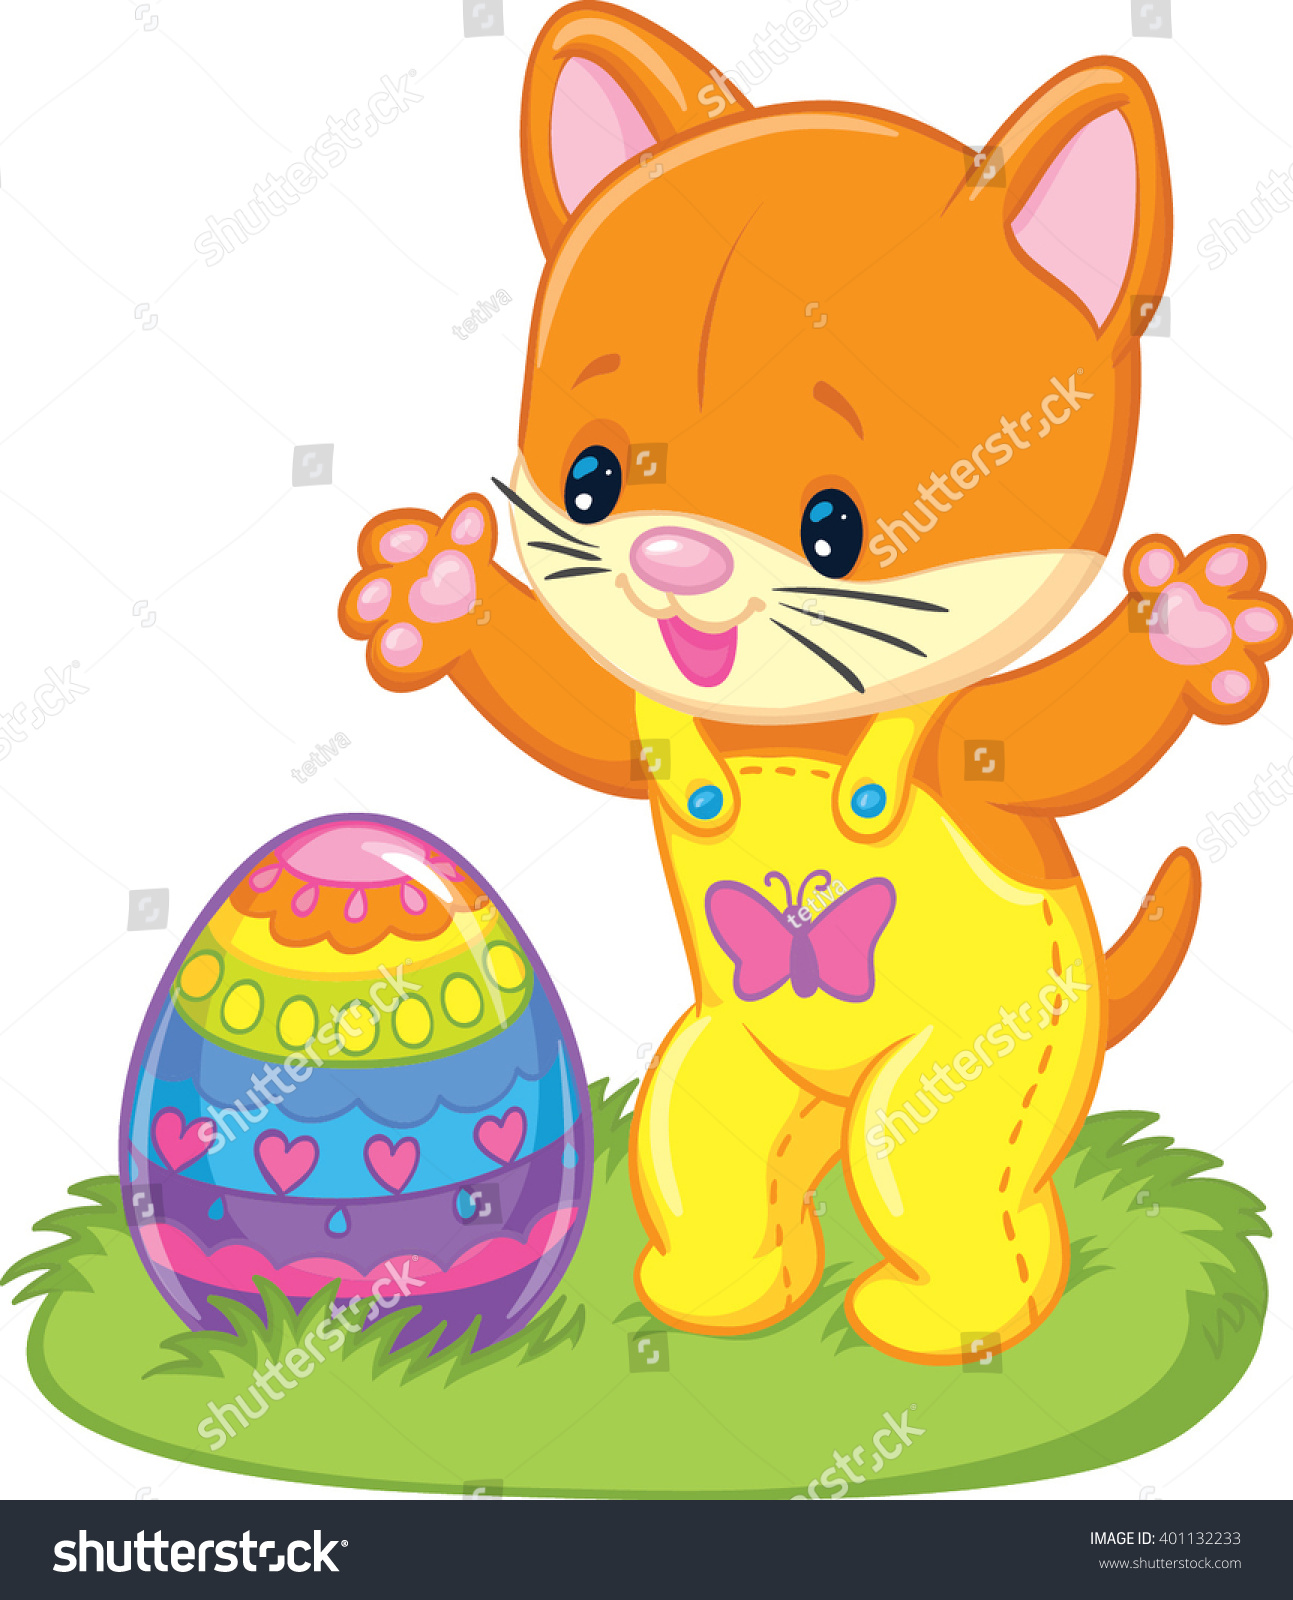 Happy Easter. Kitten found a decorated Easter Egg. Vector illustration